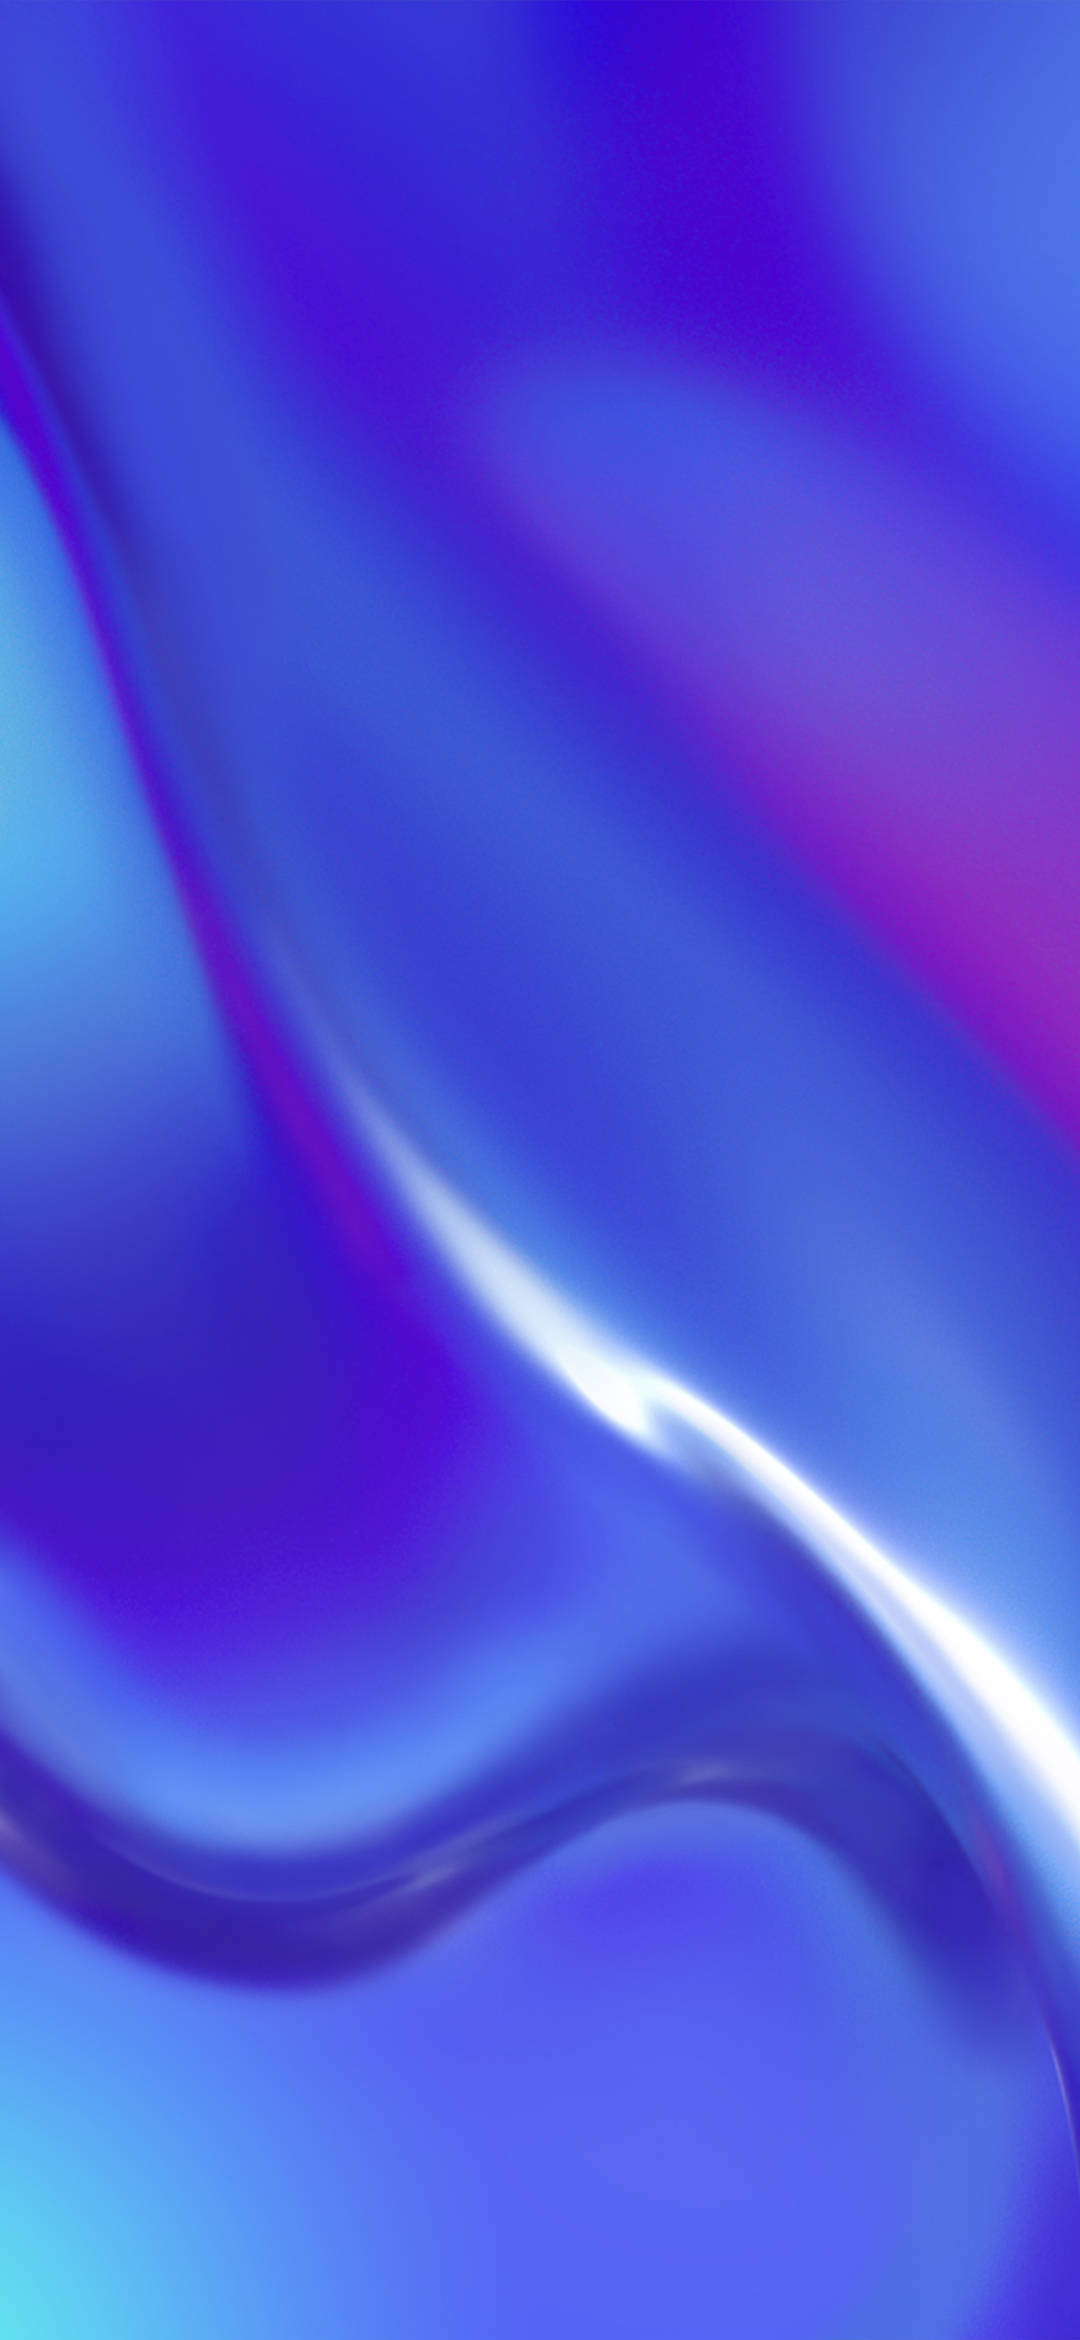 Download Abstract Iridescent Violet Blue Oppo A5s Wallpaper 